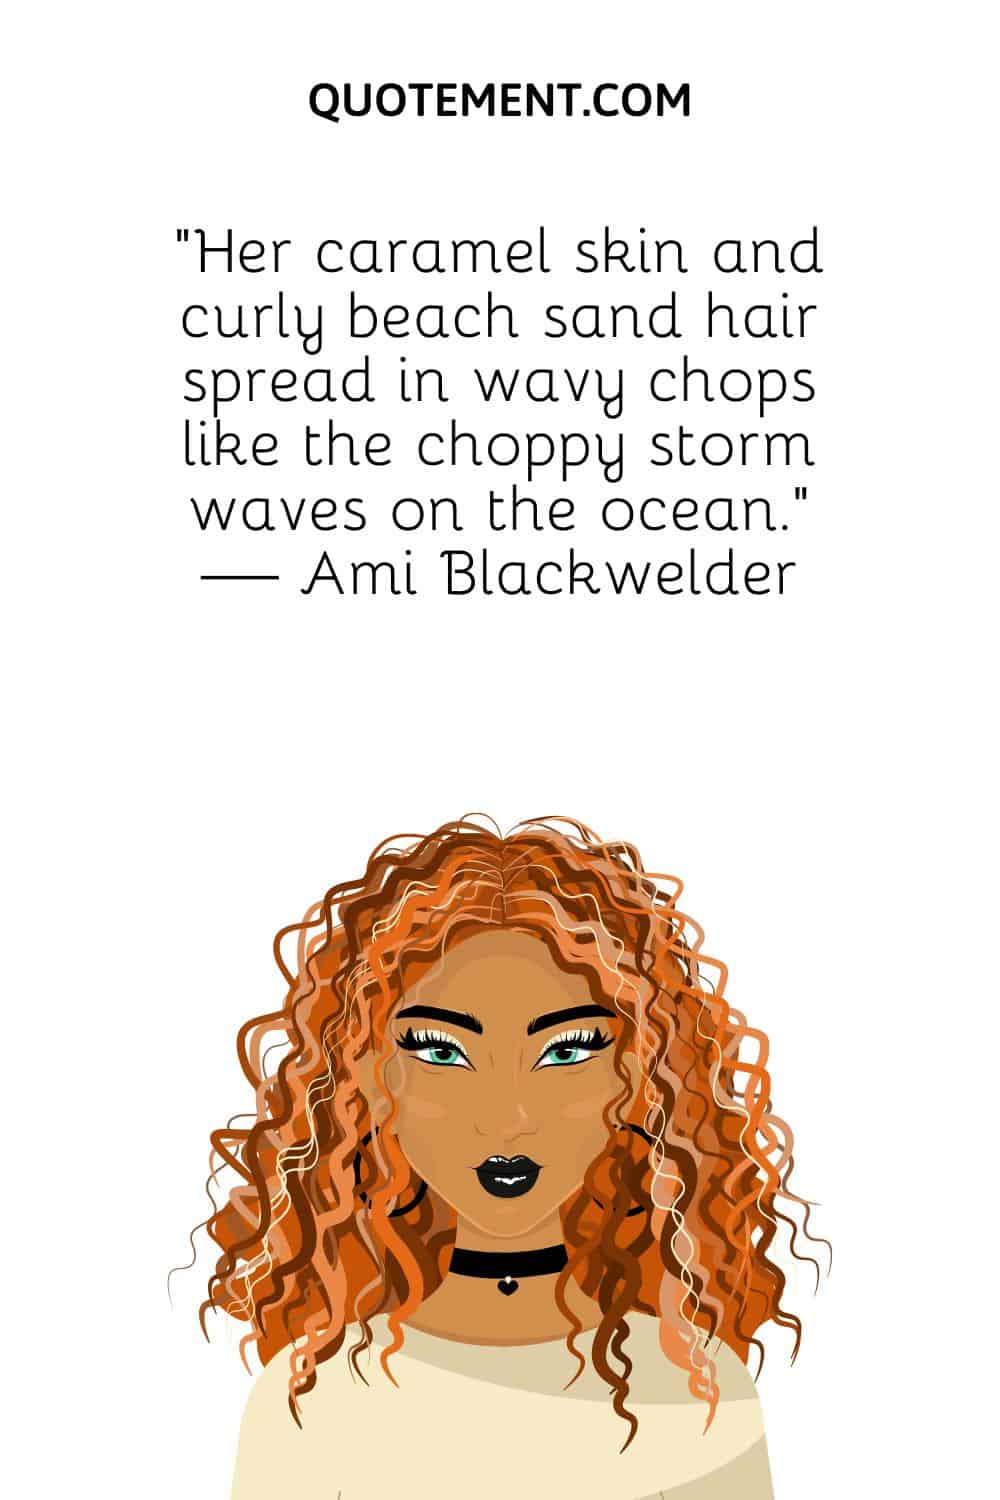 Her caramel skin and curly beach sand hair spread in wavy chops like the choppy storm waves on the ocean